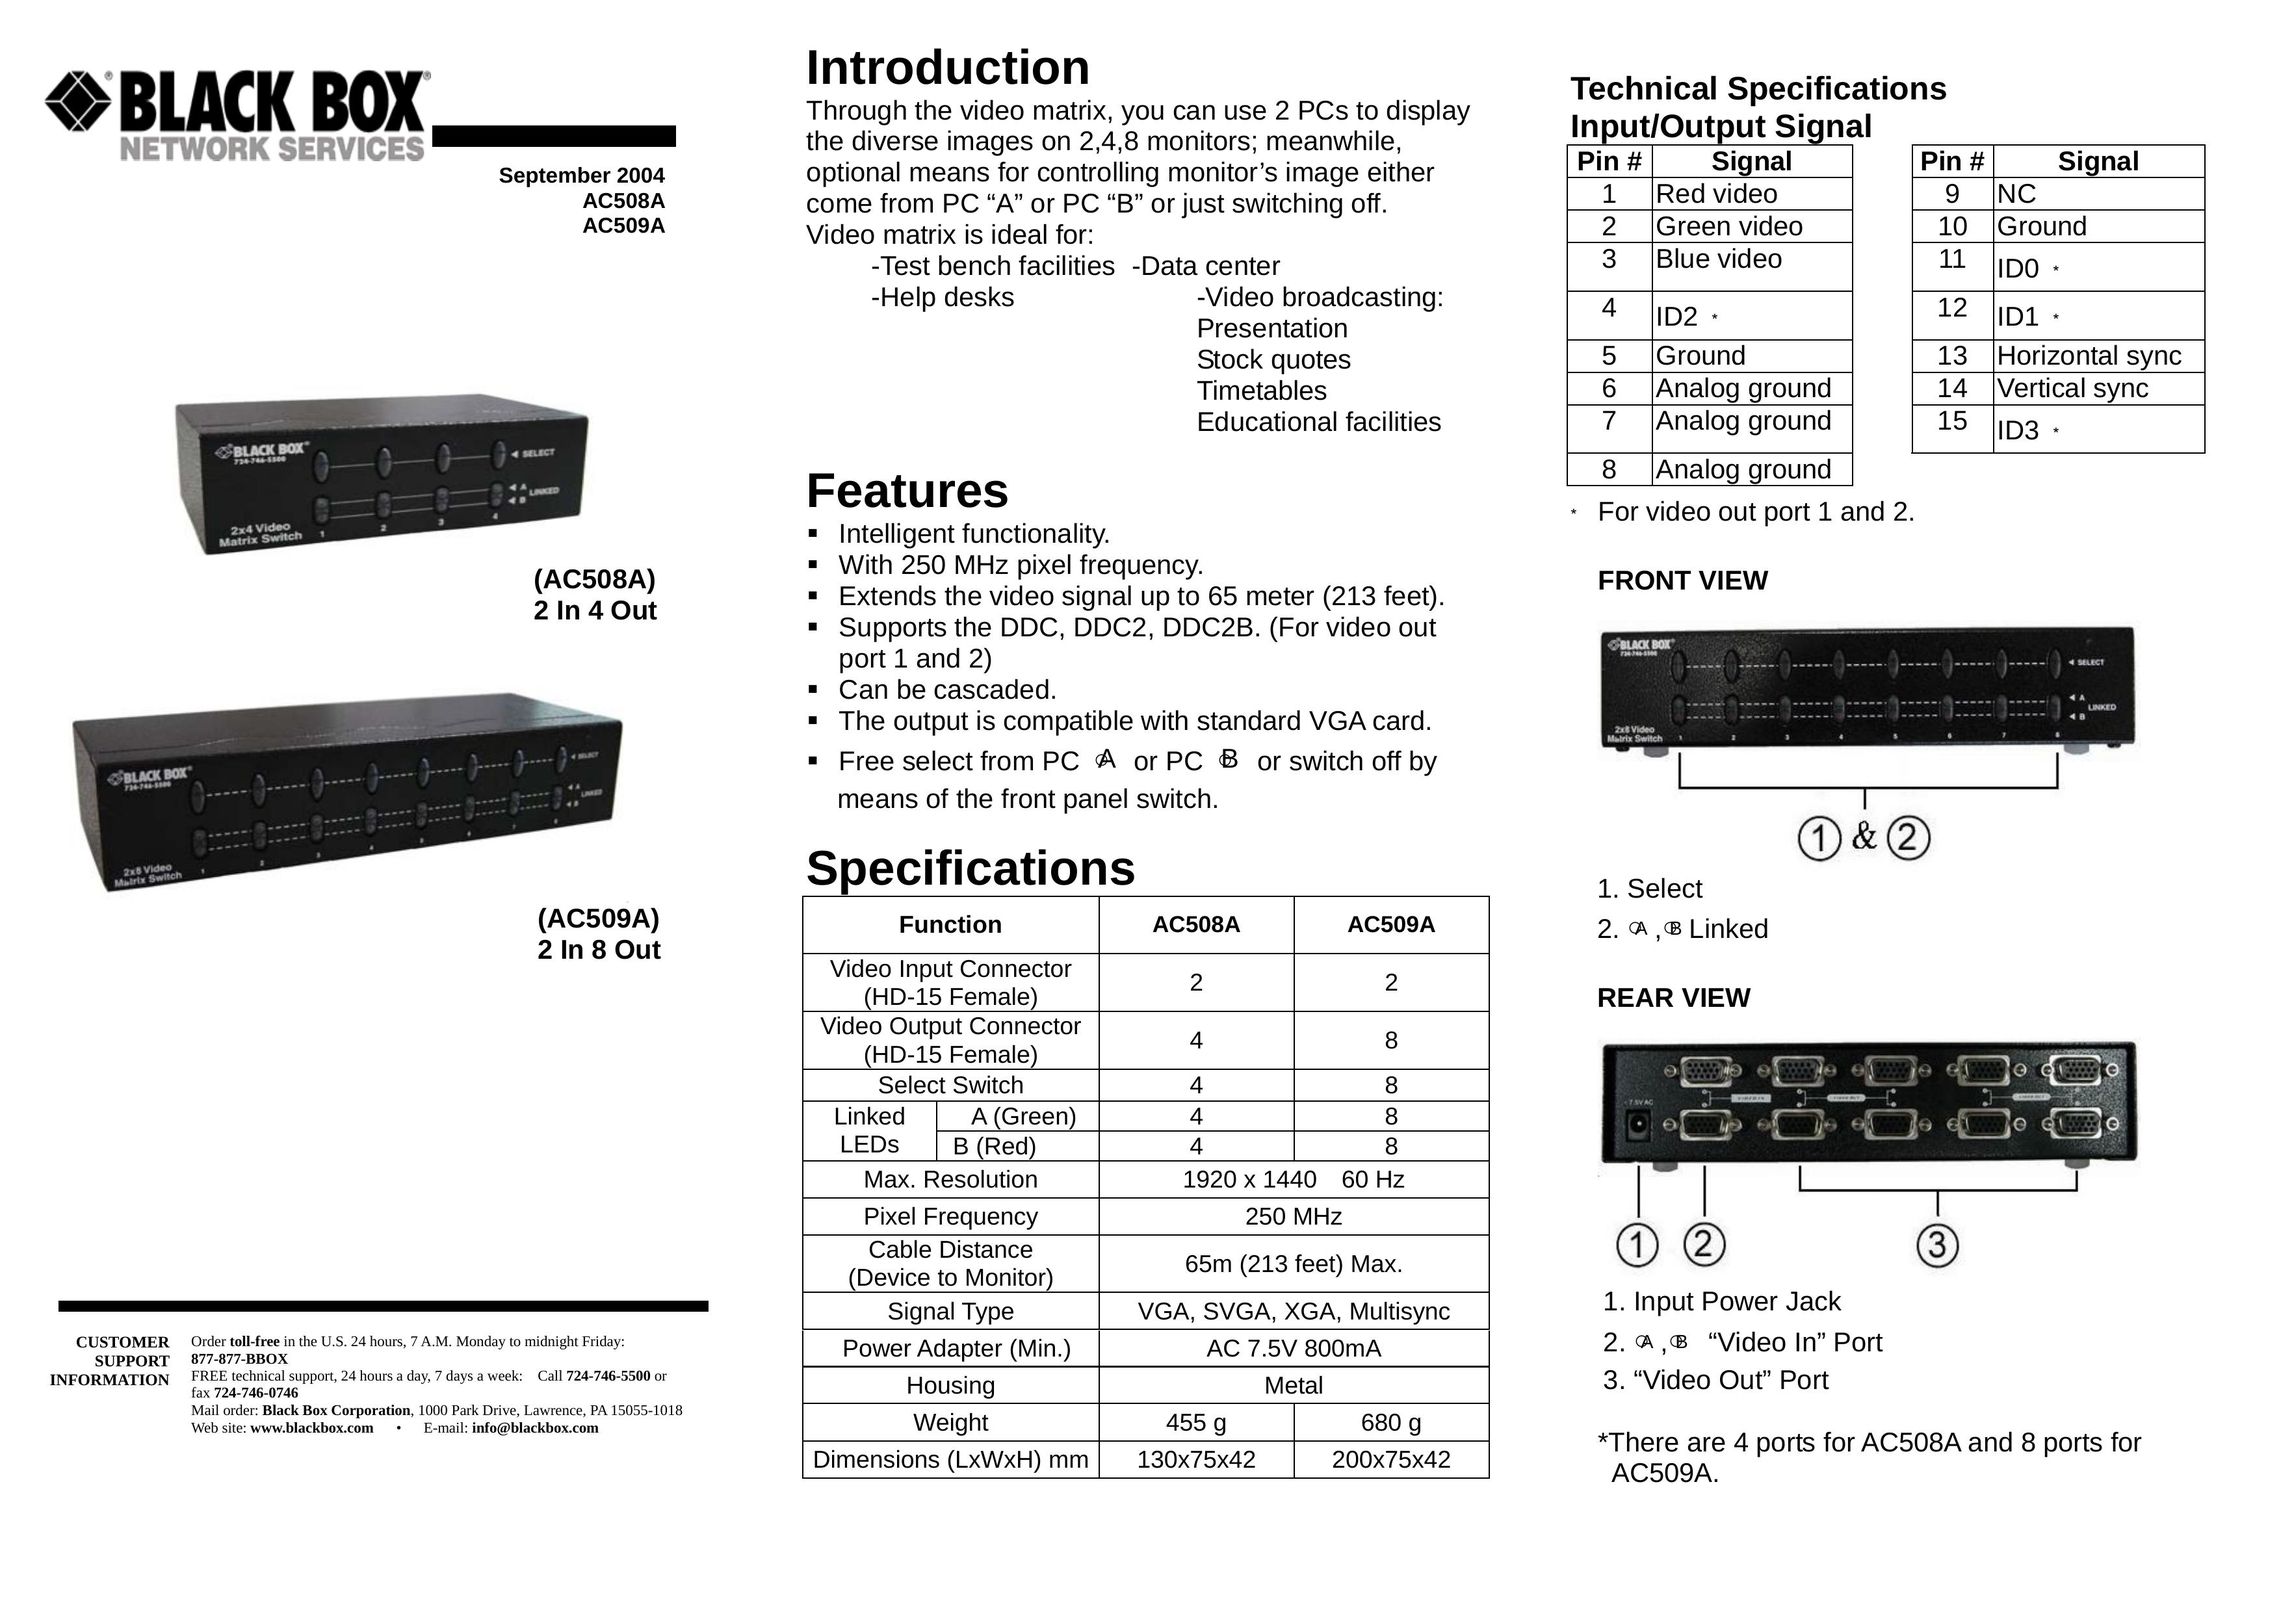 Black Box AC508A Network Router User Manual